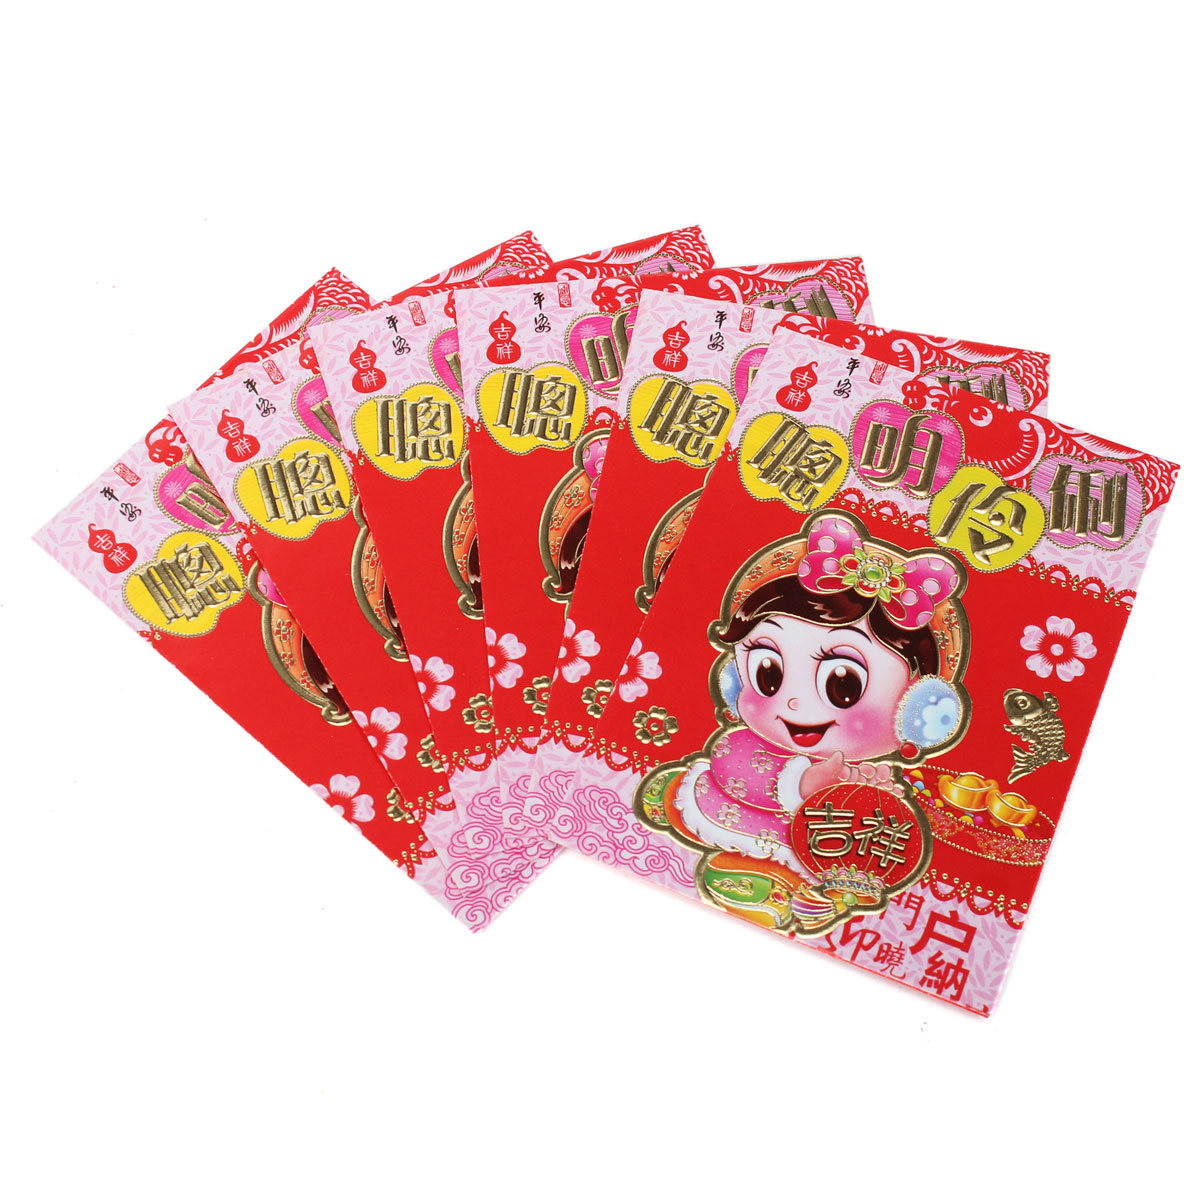 6pcs-Clever-Chinatown-Chinese-Spring-Festival-Red-Envelope-Lucky-Money-Bag-New-Year-1032466